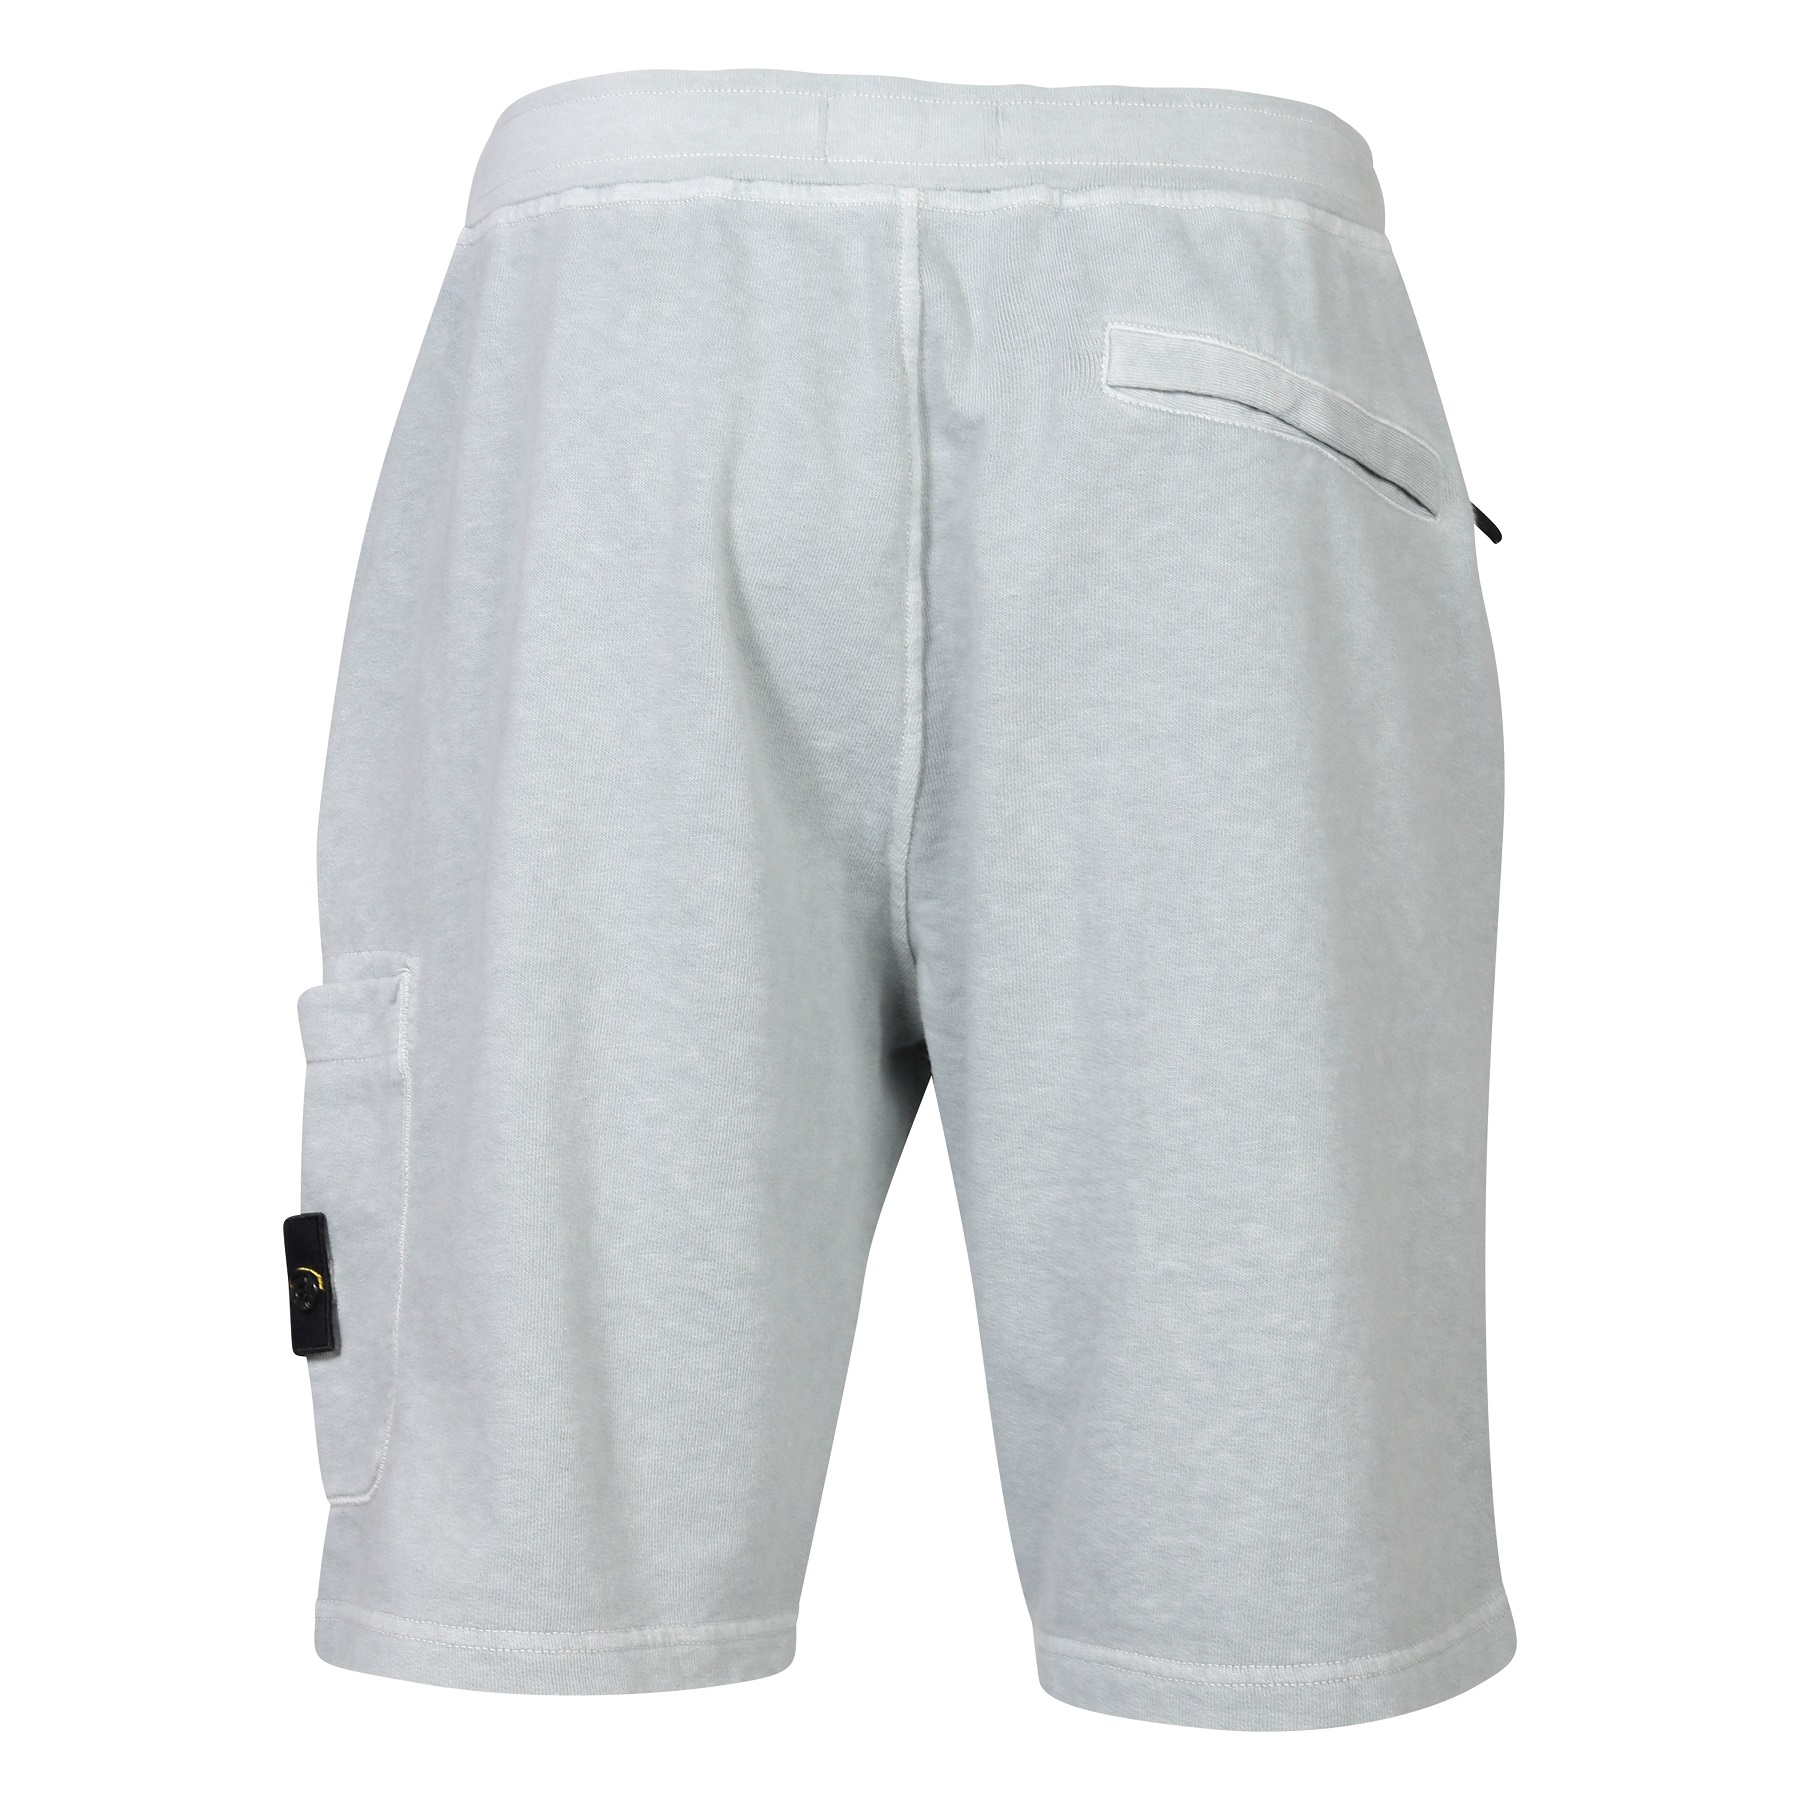 STONE ISLAND Light Sweat Short in Washed Sky Blue L